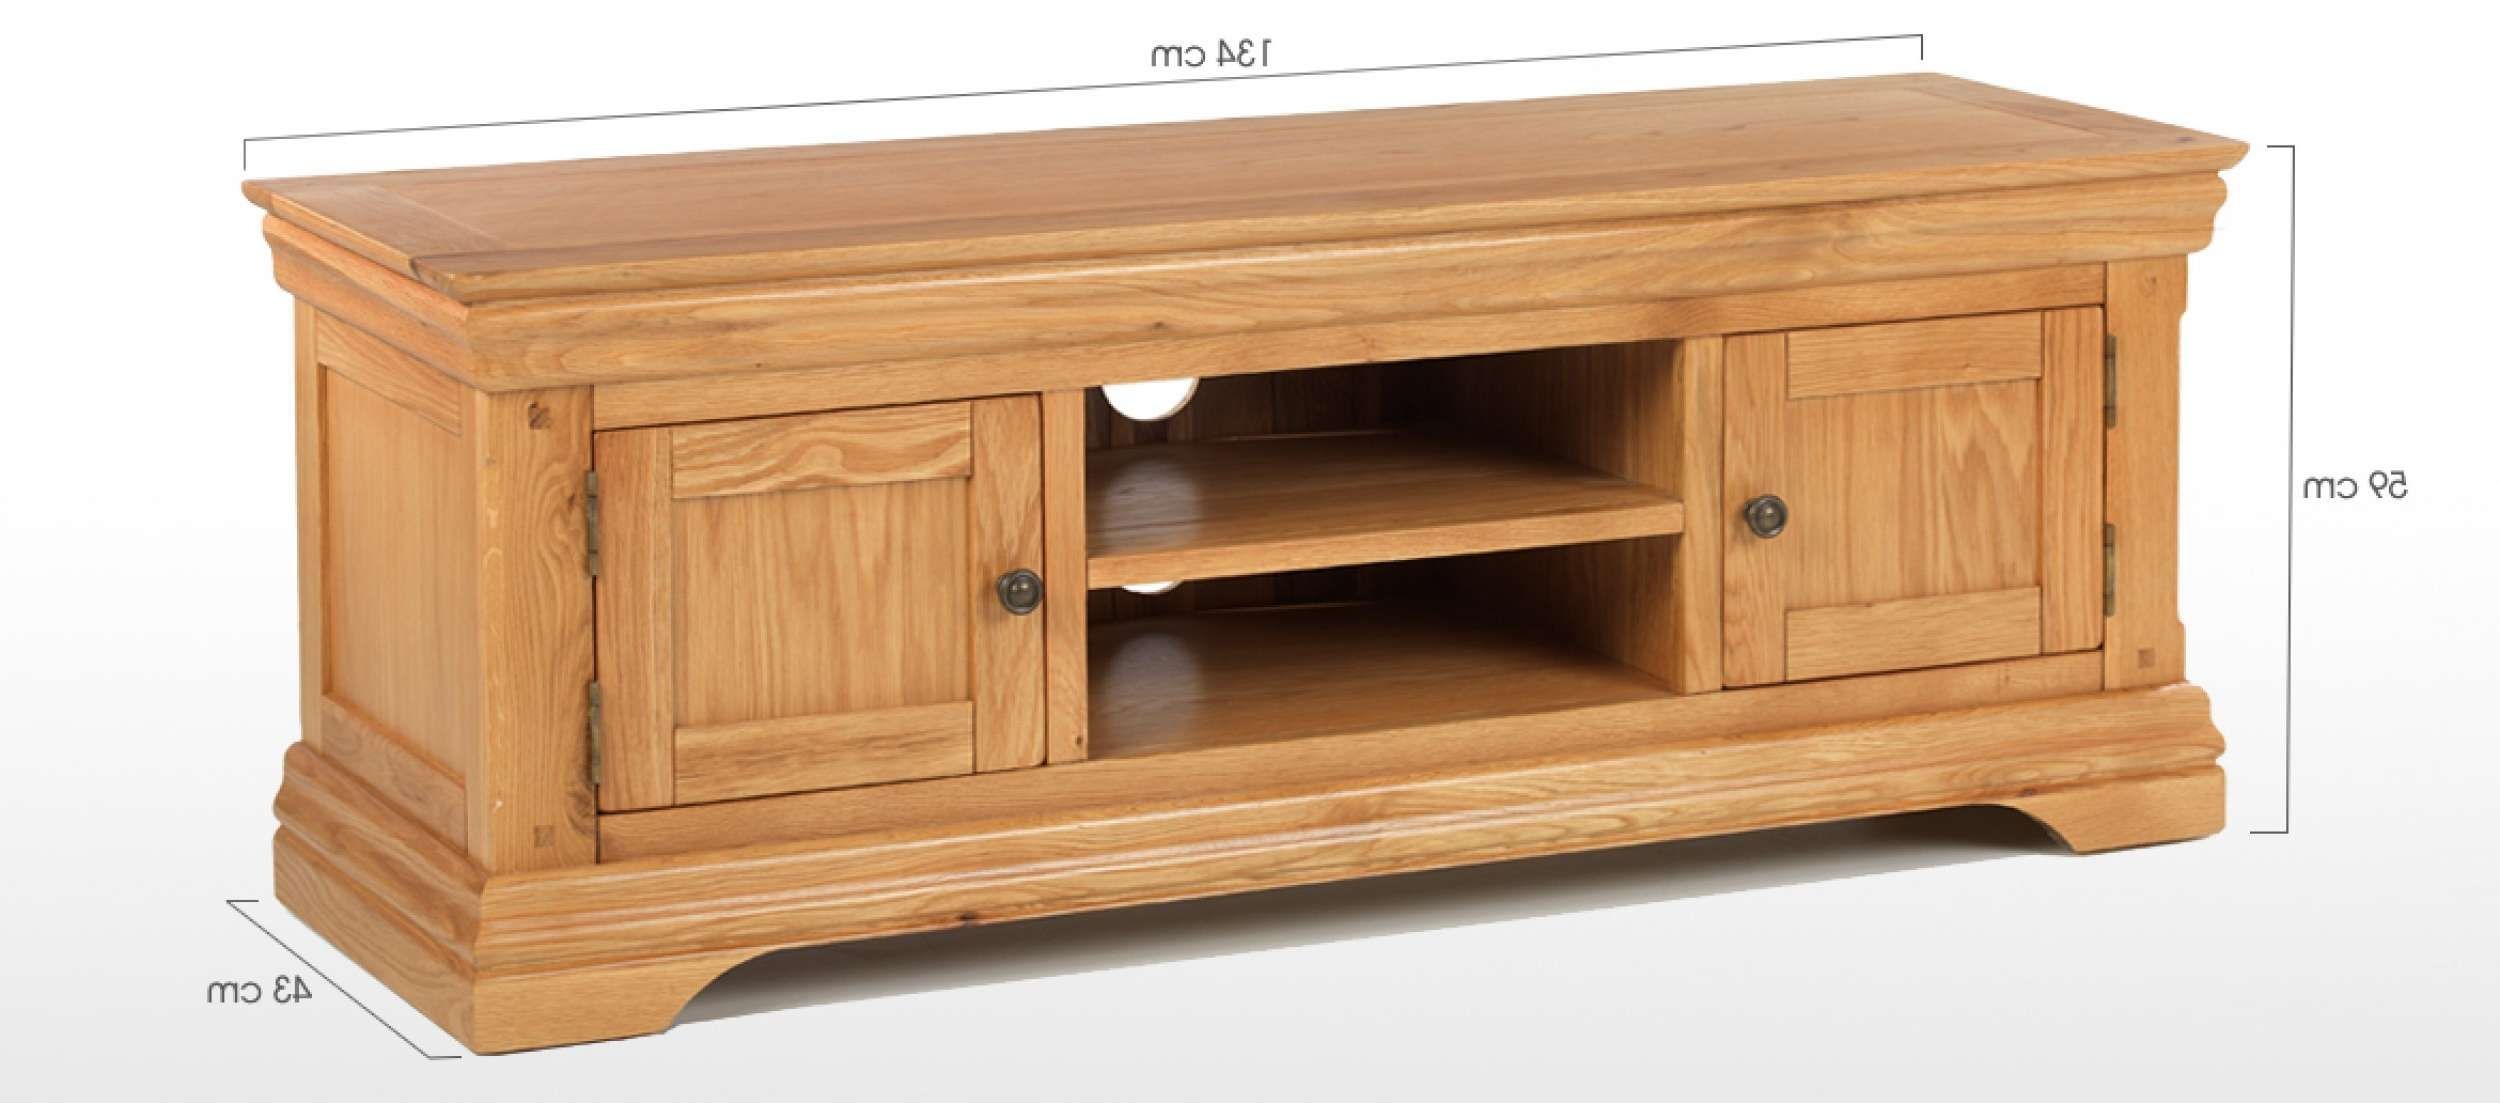 Constance Oak Plasma Tv Stand | Quercus Living In Plasma Tv Stands (View 12 of 15)